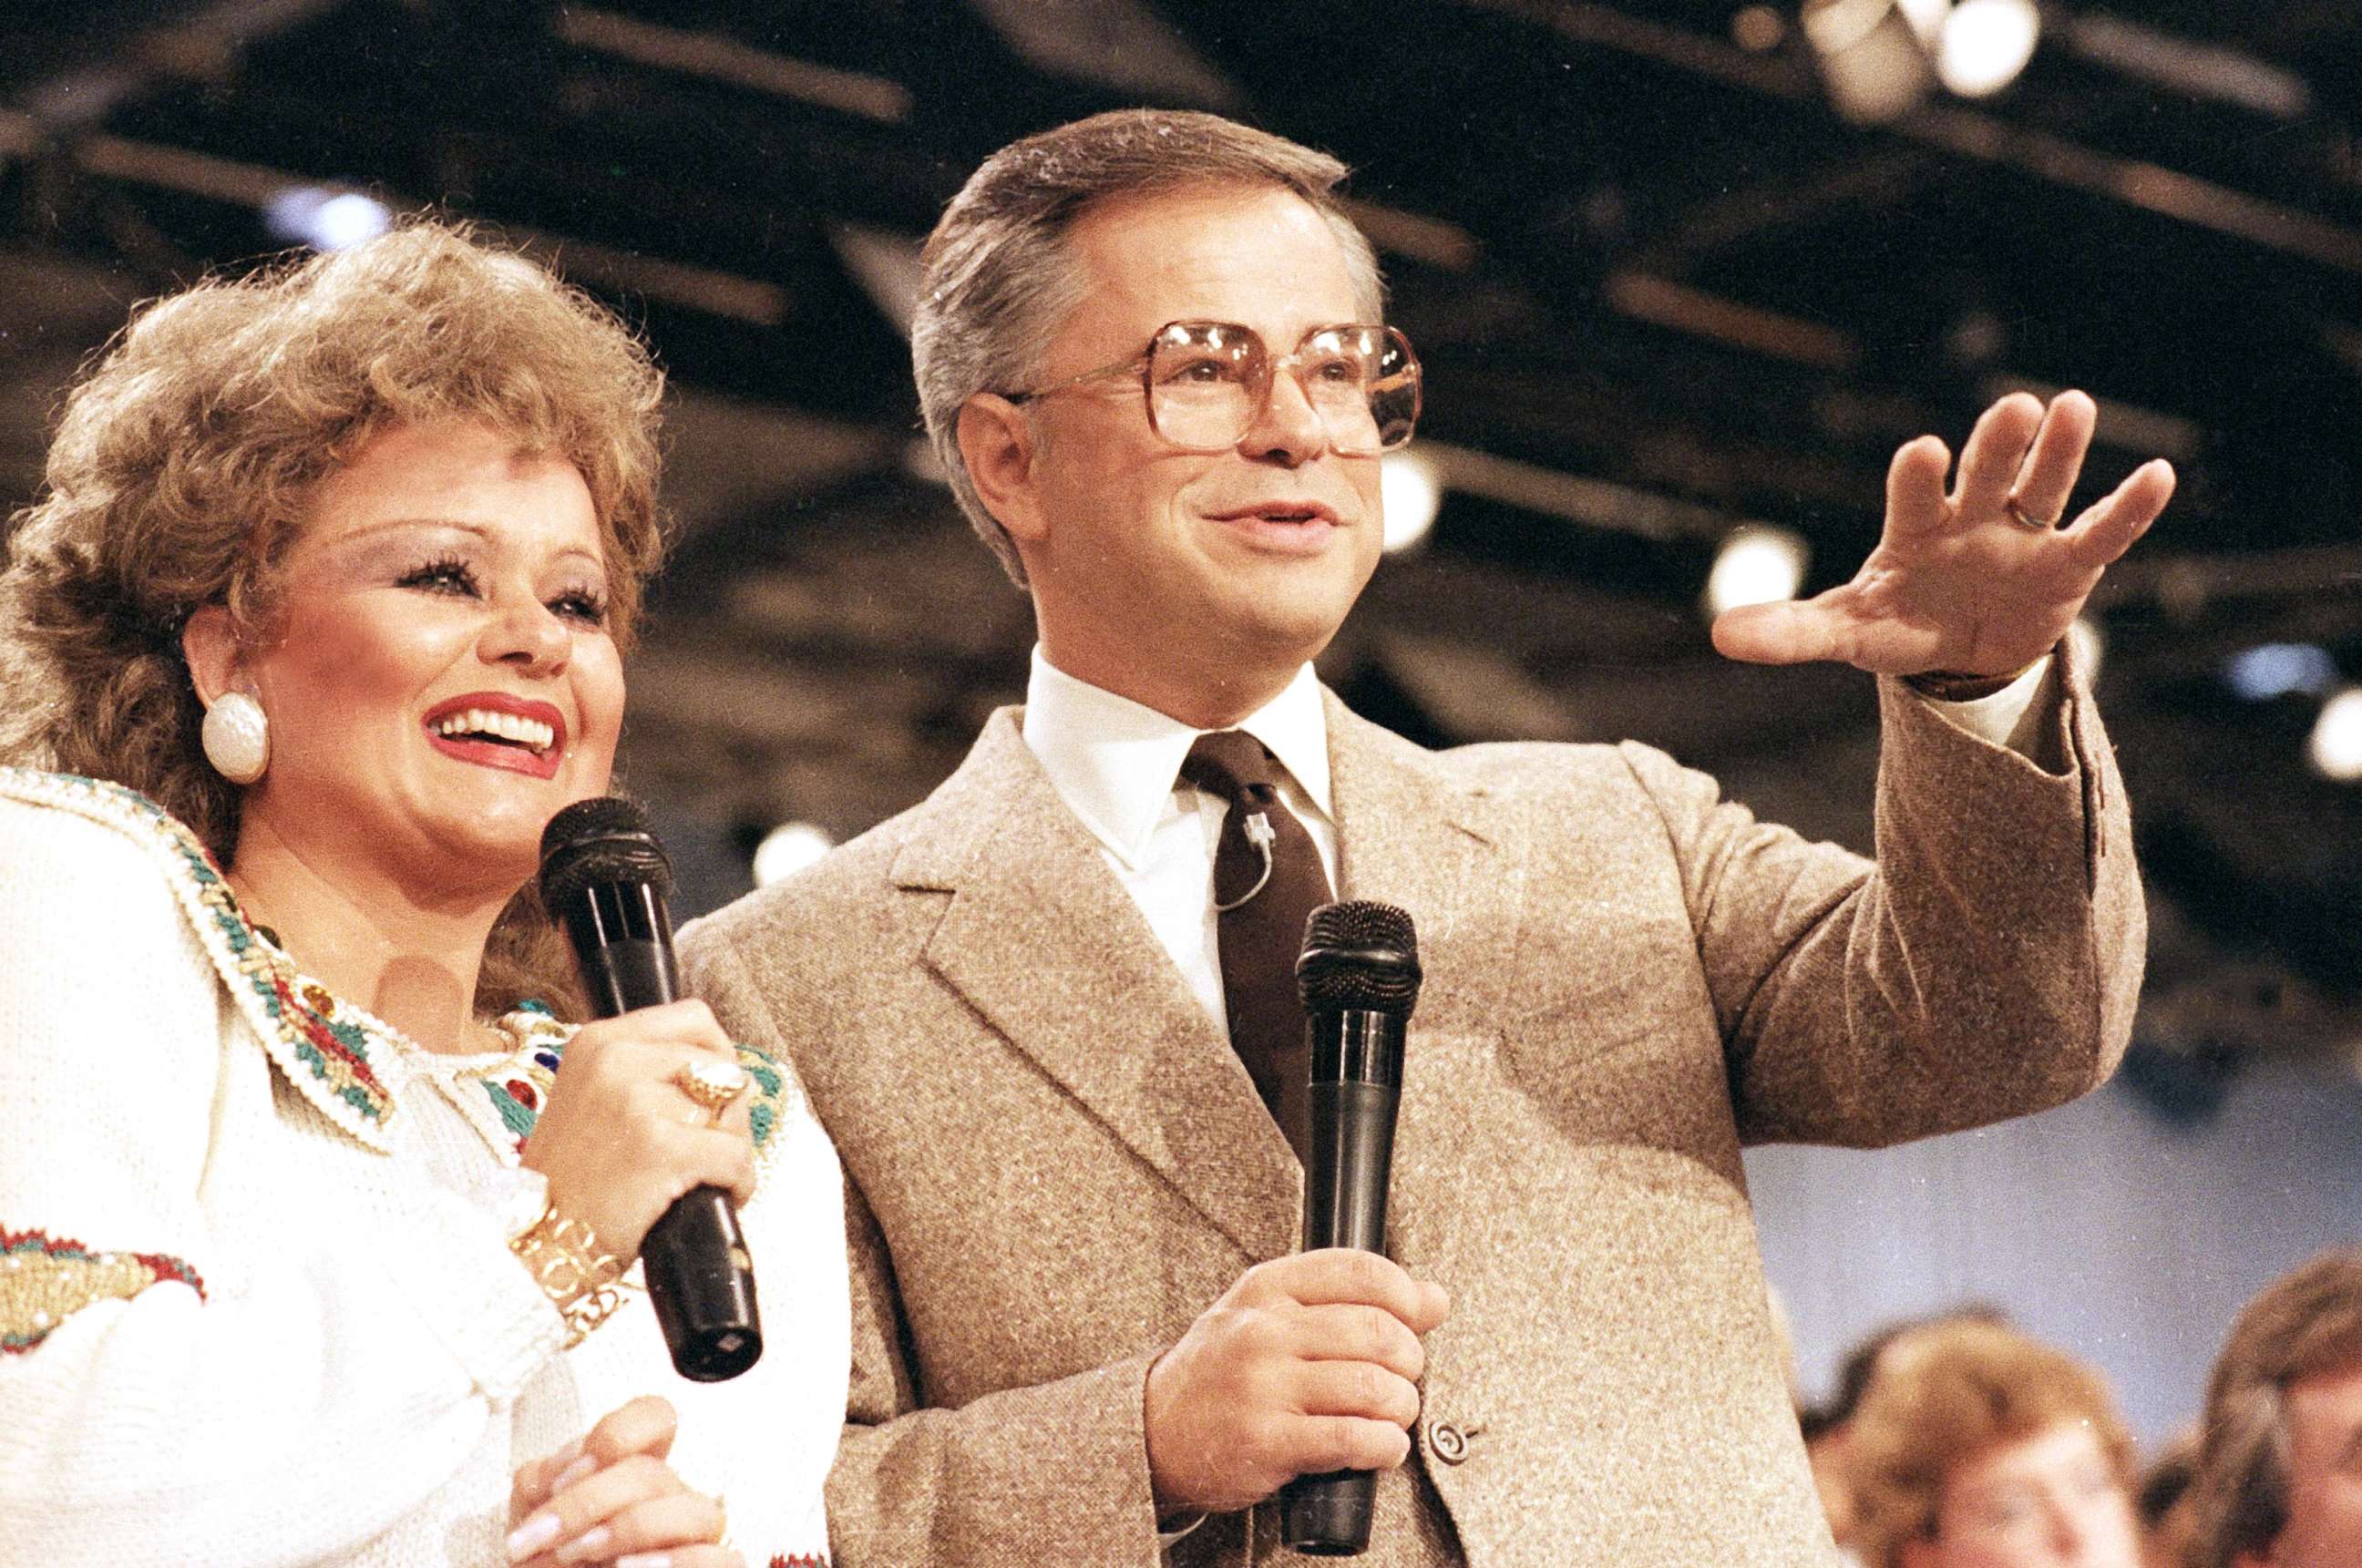 PHOTO: Tammy Faye Bakker and her then-husband, television evangelist Jim Bakker, talk to their TV audience at their PTL ministry near Fort Mill, S.C., in this Aug. 20, 1986 file photo.